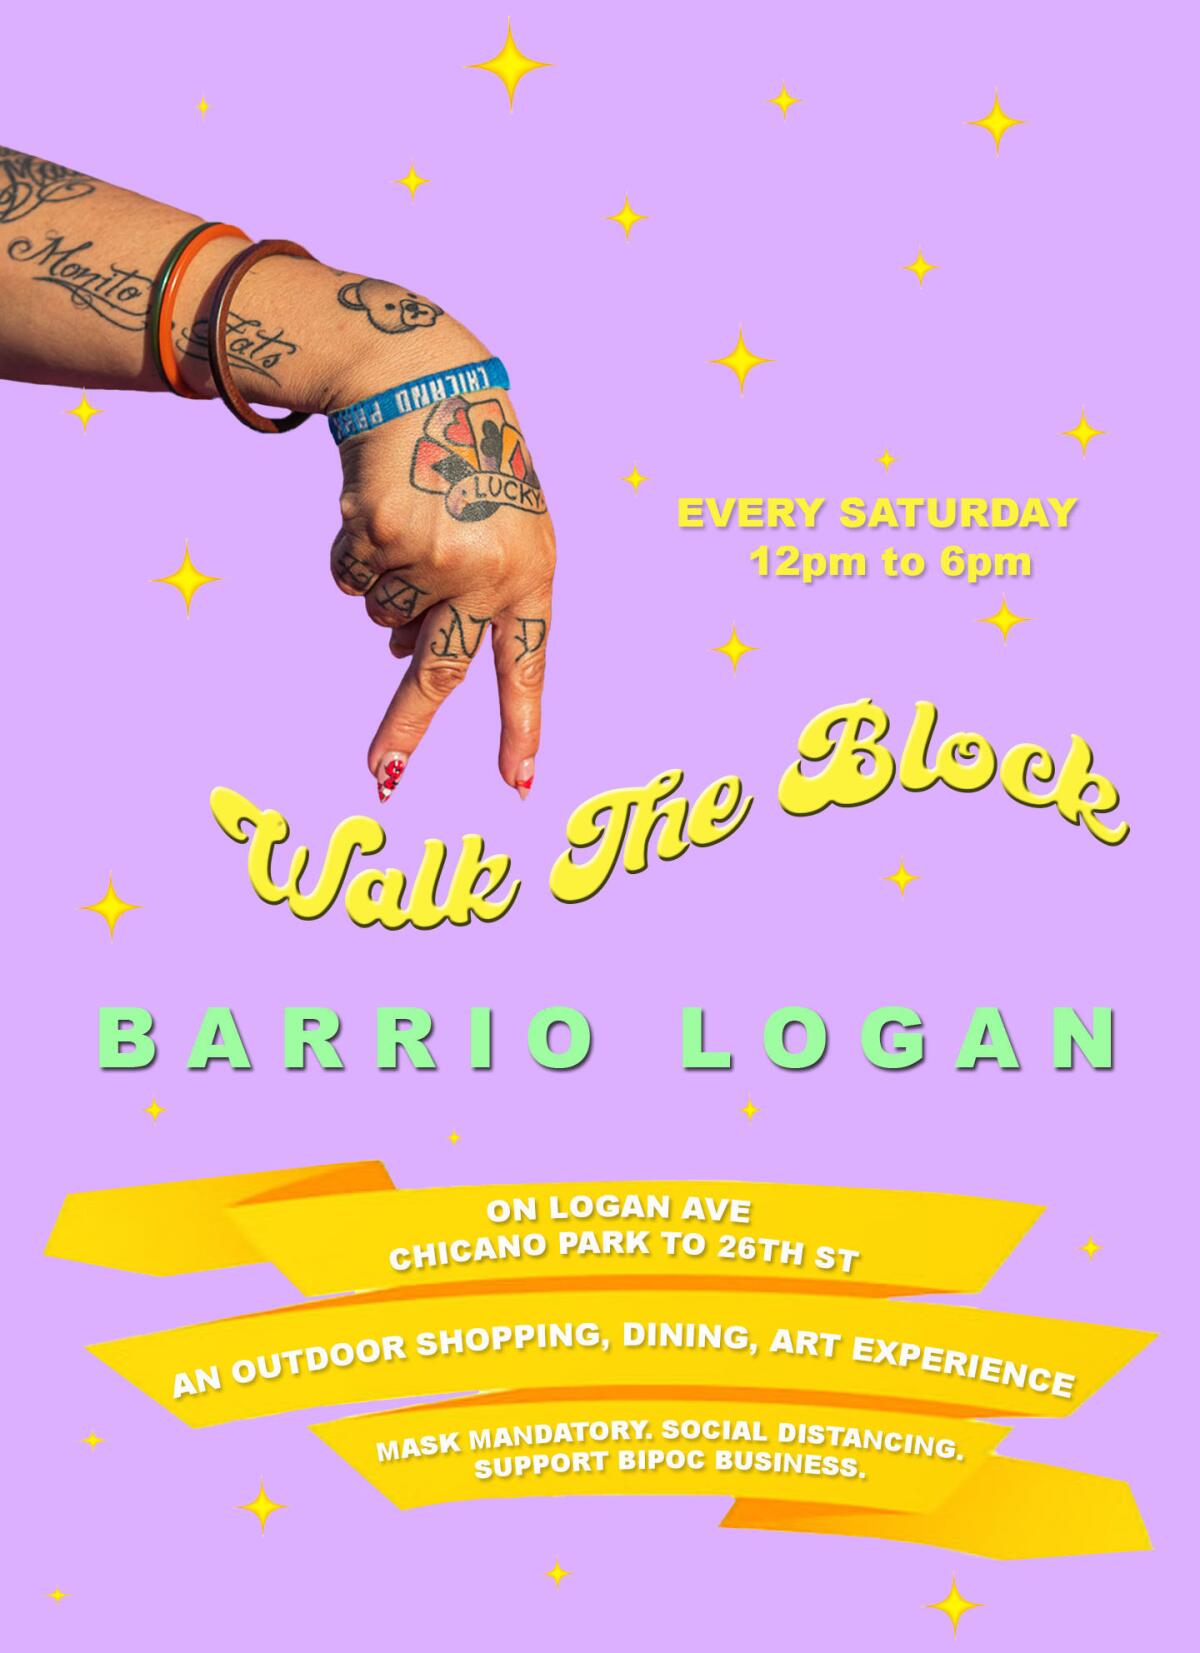 A promotional flyer for Walk The Block designed by Alex Perez Demma